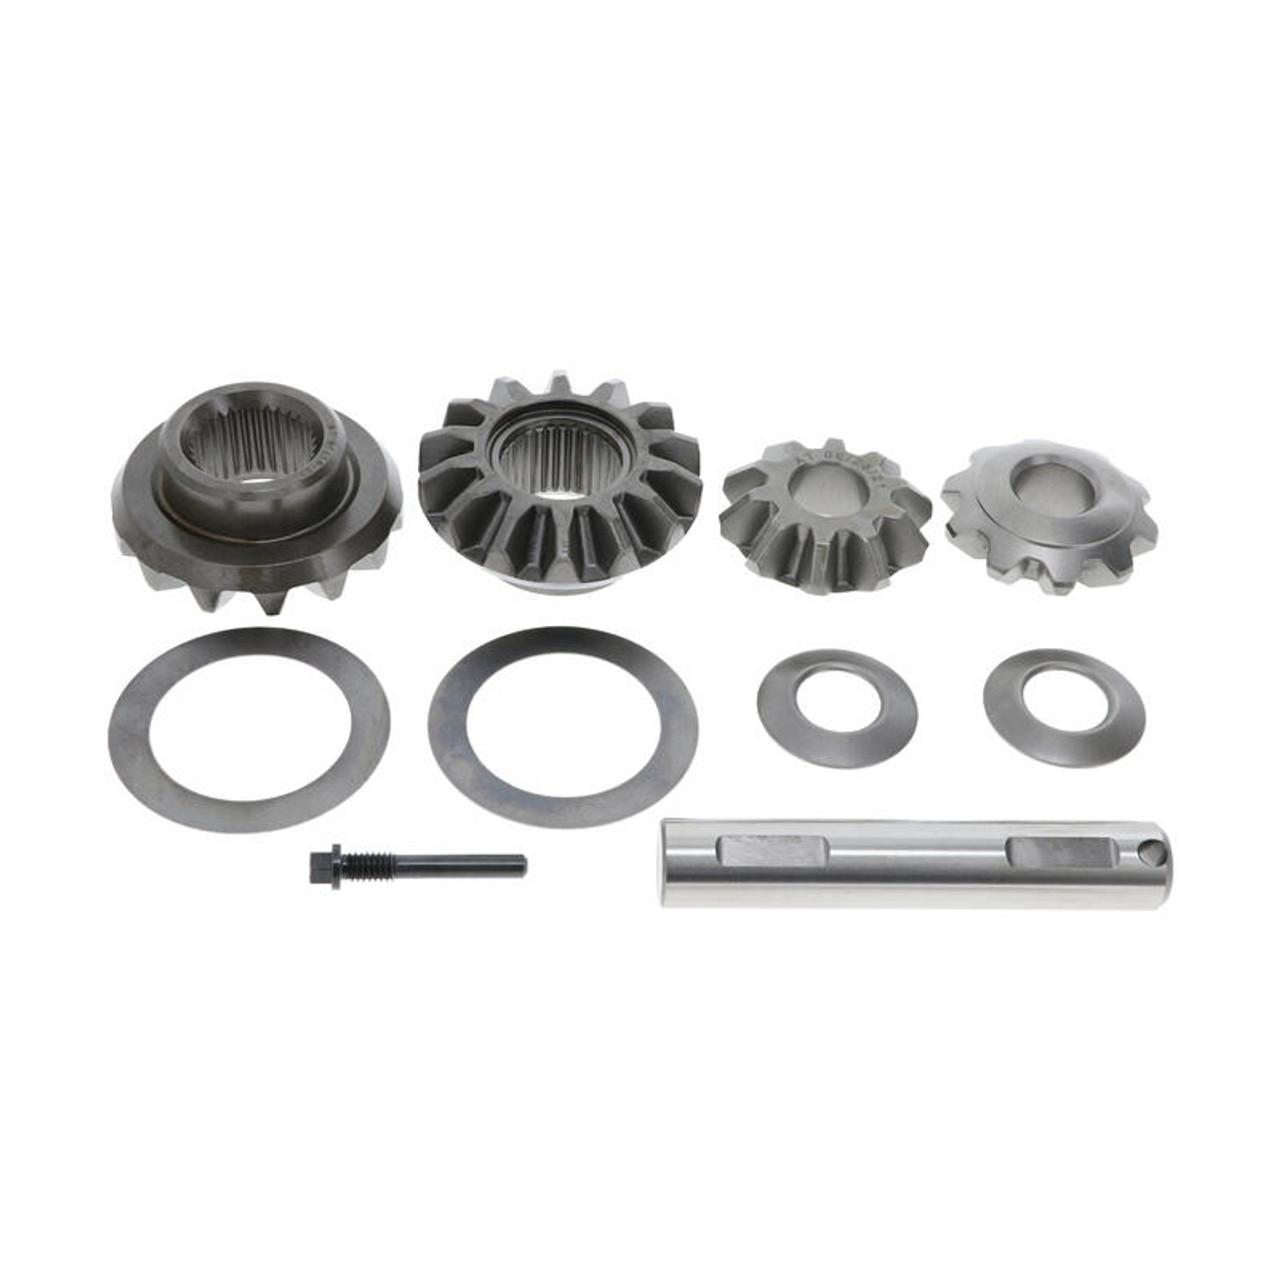 FORD 8.8 REAR DIFFERENTIAL CARRIER INTERNAL NEST KIT FITS '87-'10 31 ...